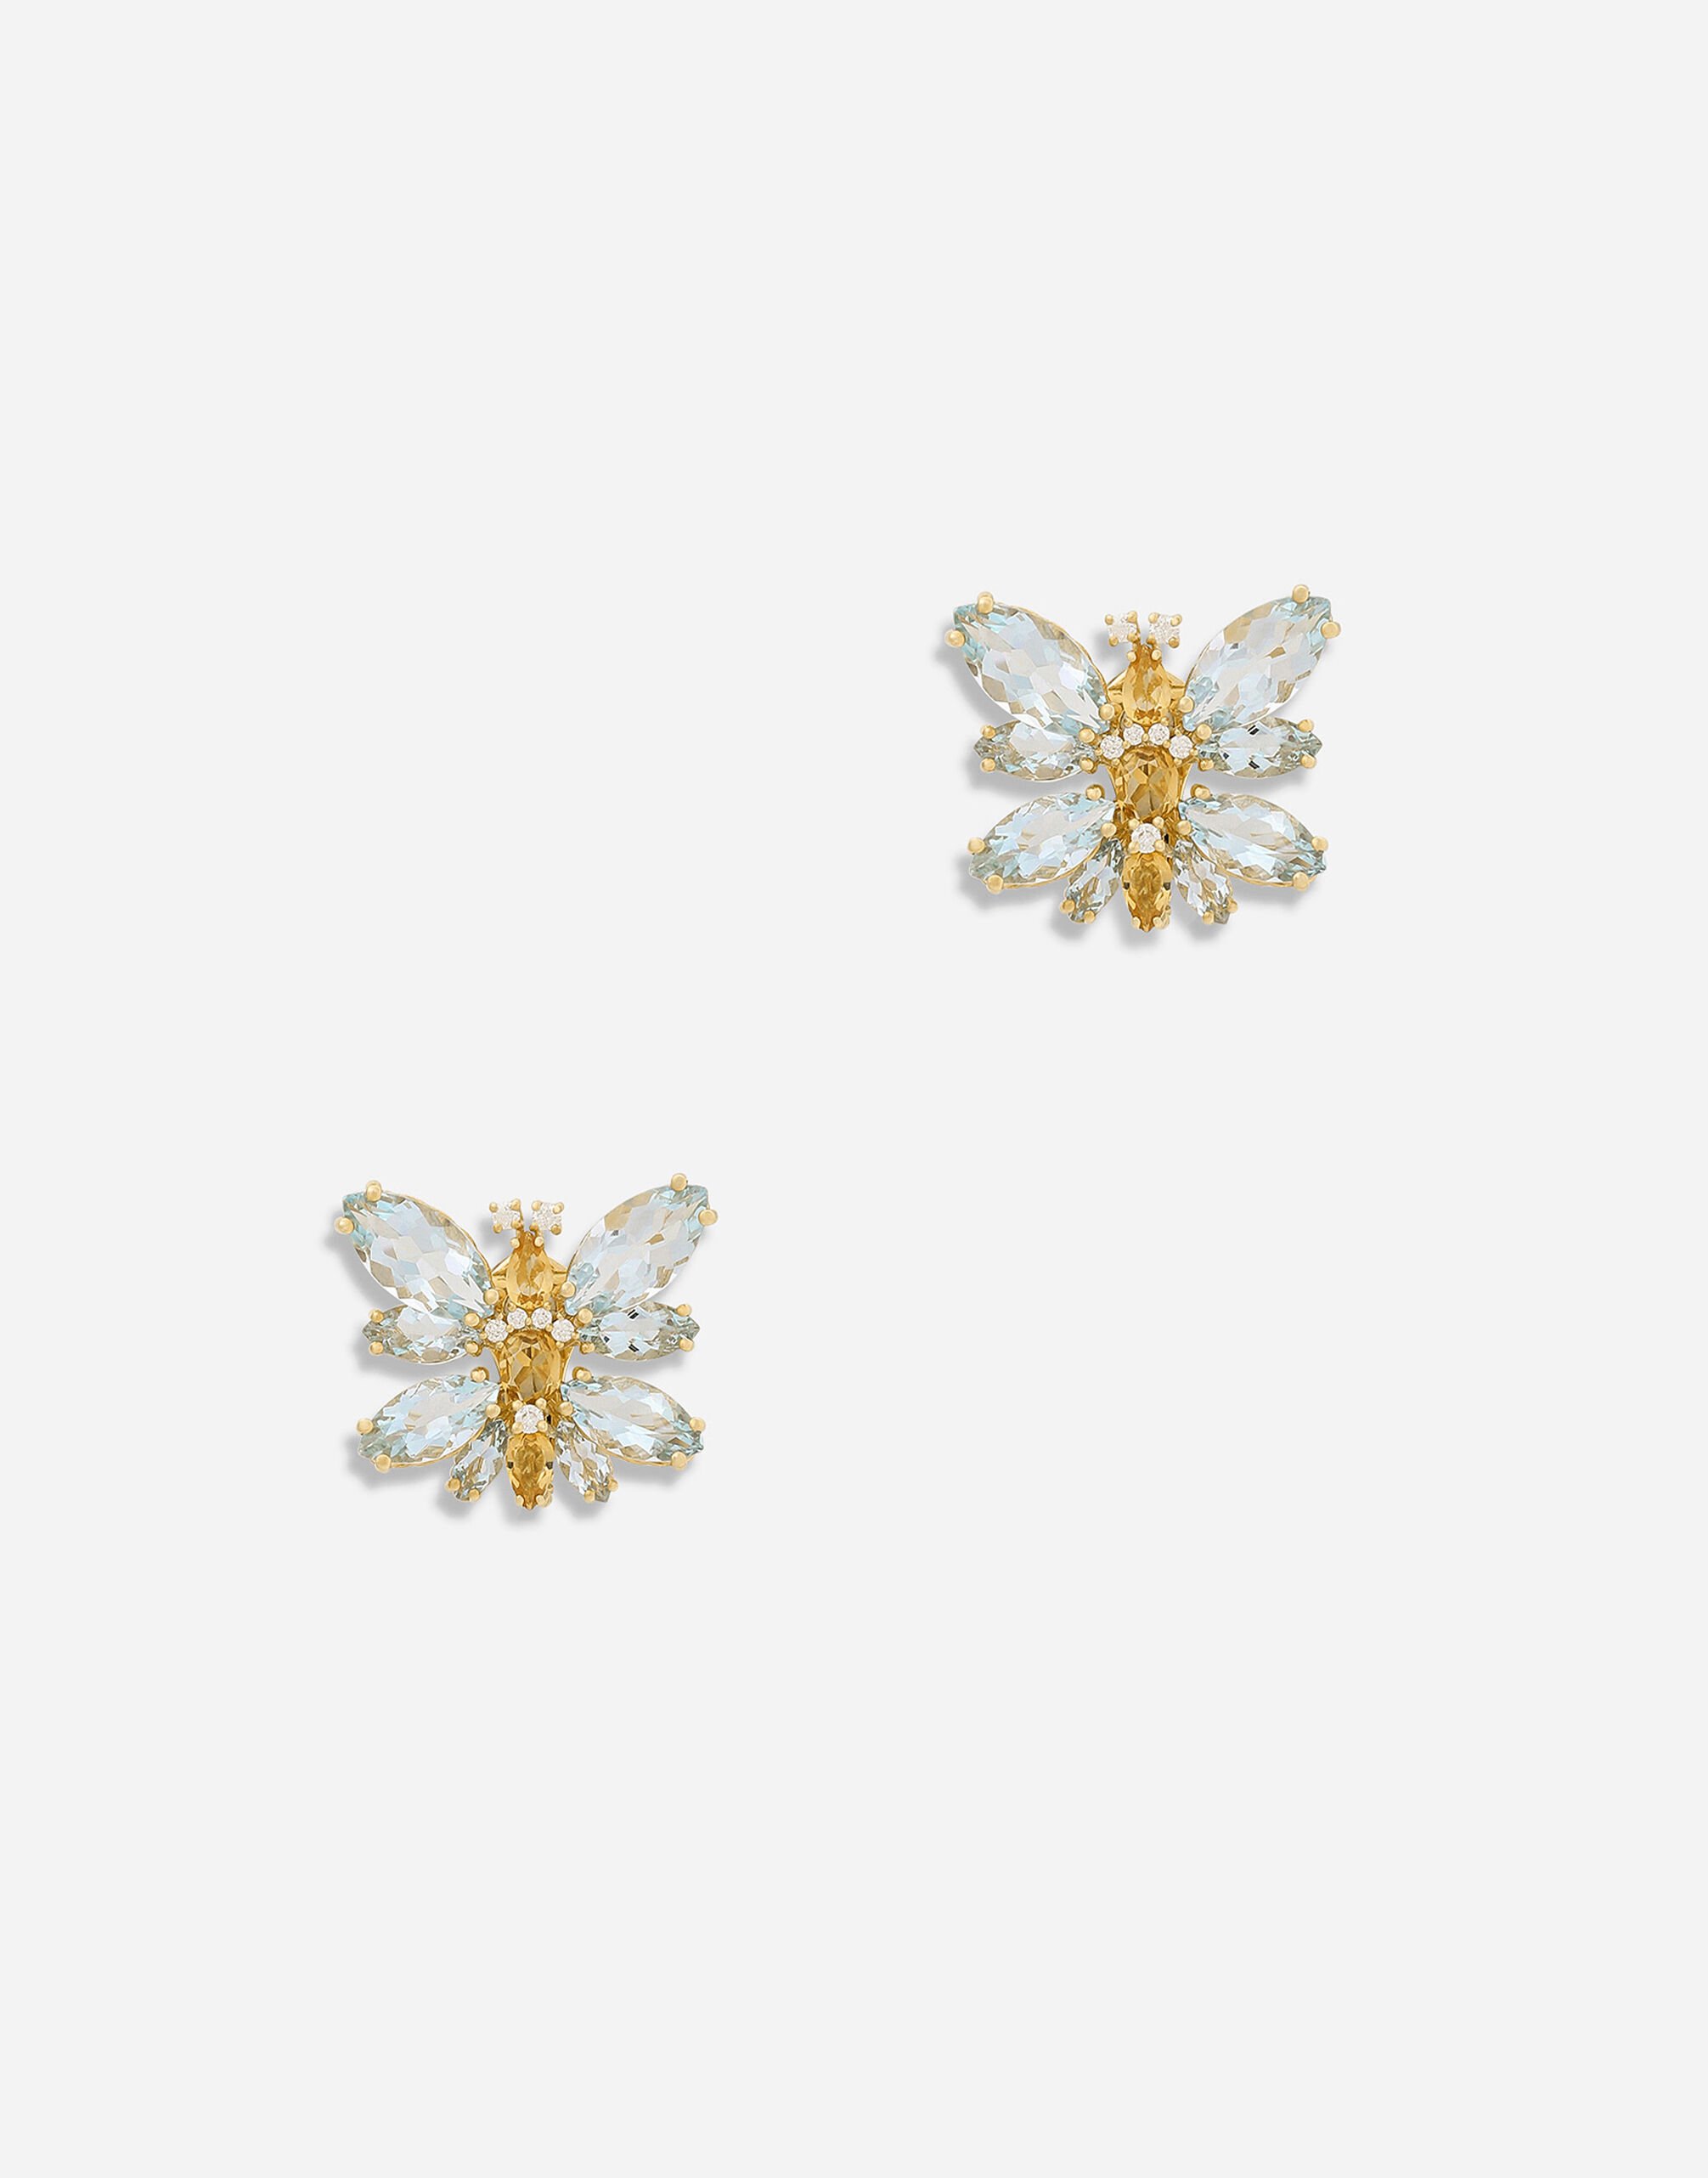 Dolce & Gabbana Spring earrings in yellow 18kt gold with aquamarine butterfly White WEQA1GWSPBL